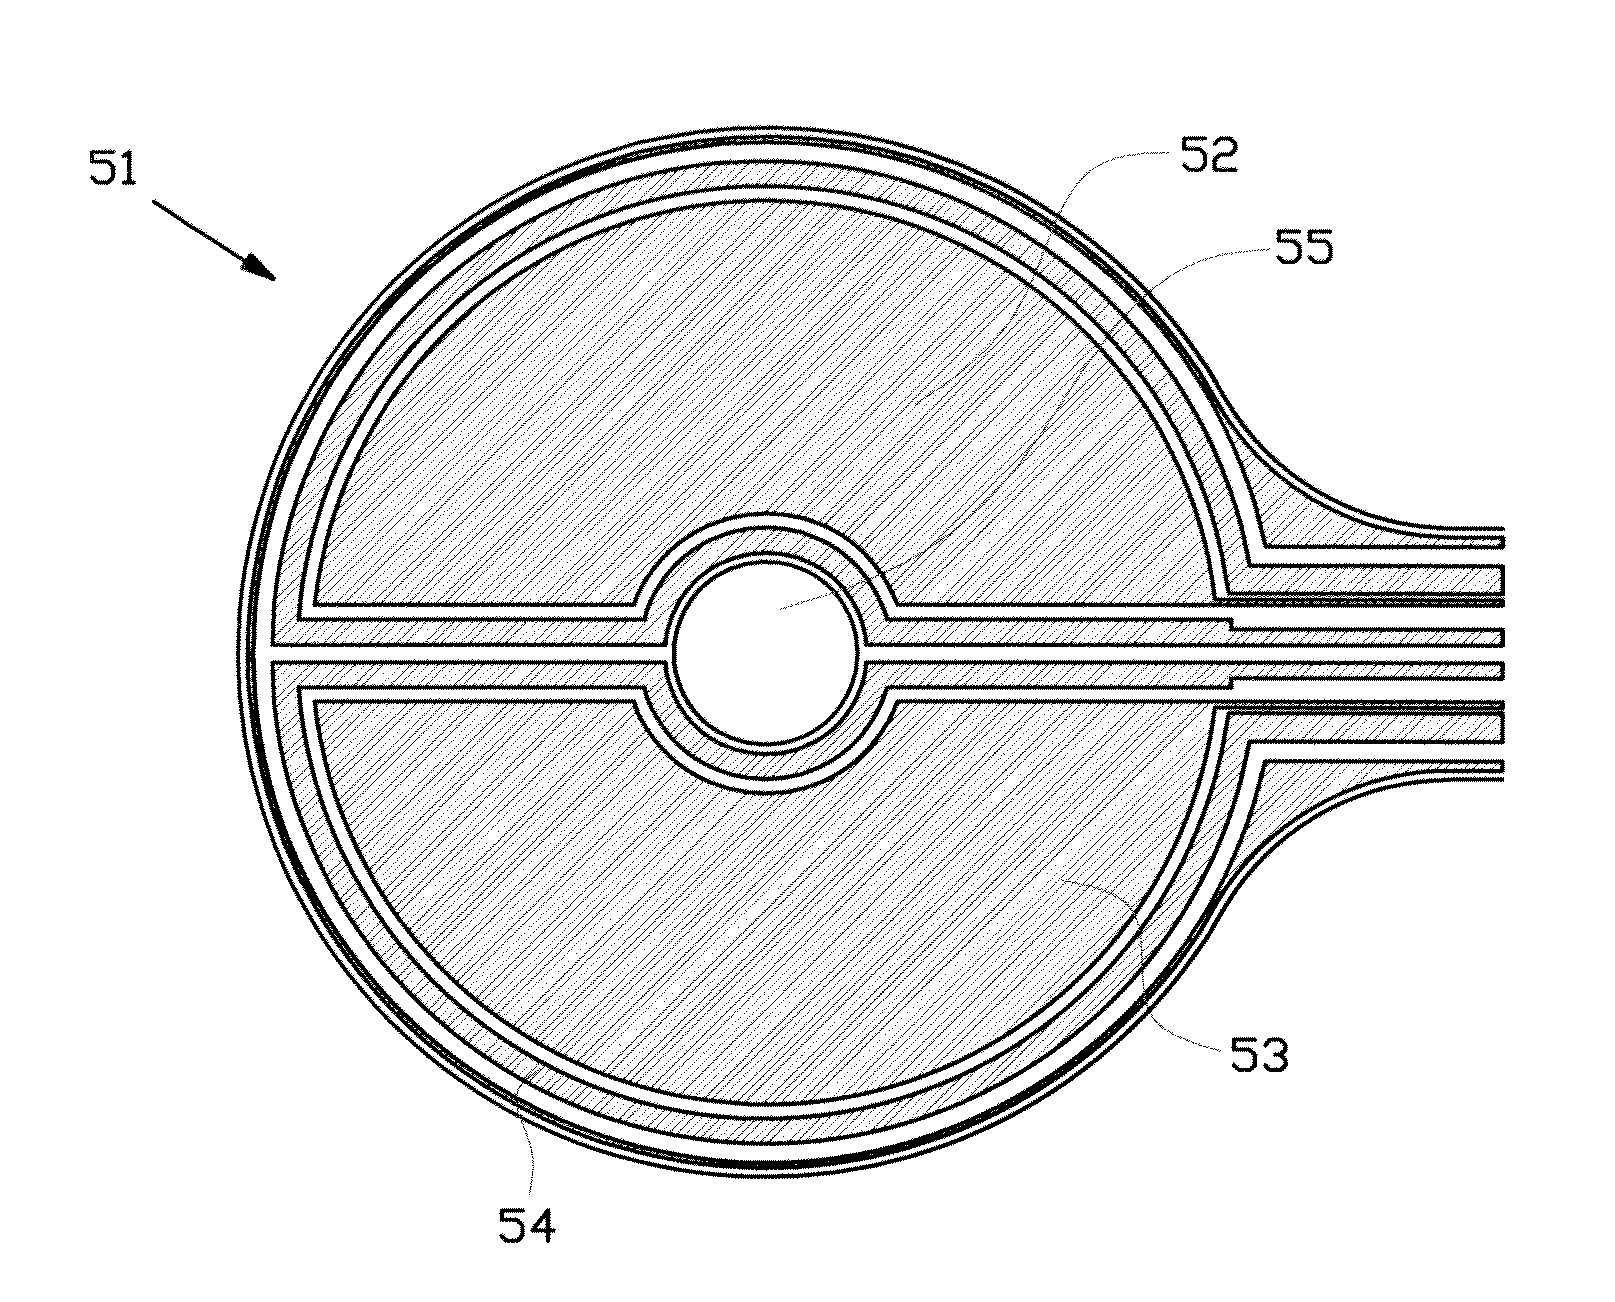 Lithography system for processing a target, such as a wafer, a method for operating a lithography system for processing a target, such as a wafer and a substrate for use in such a lithography system